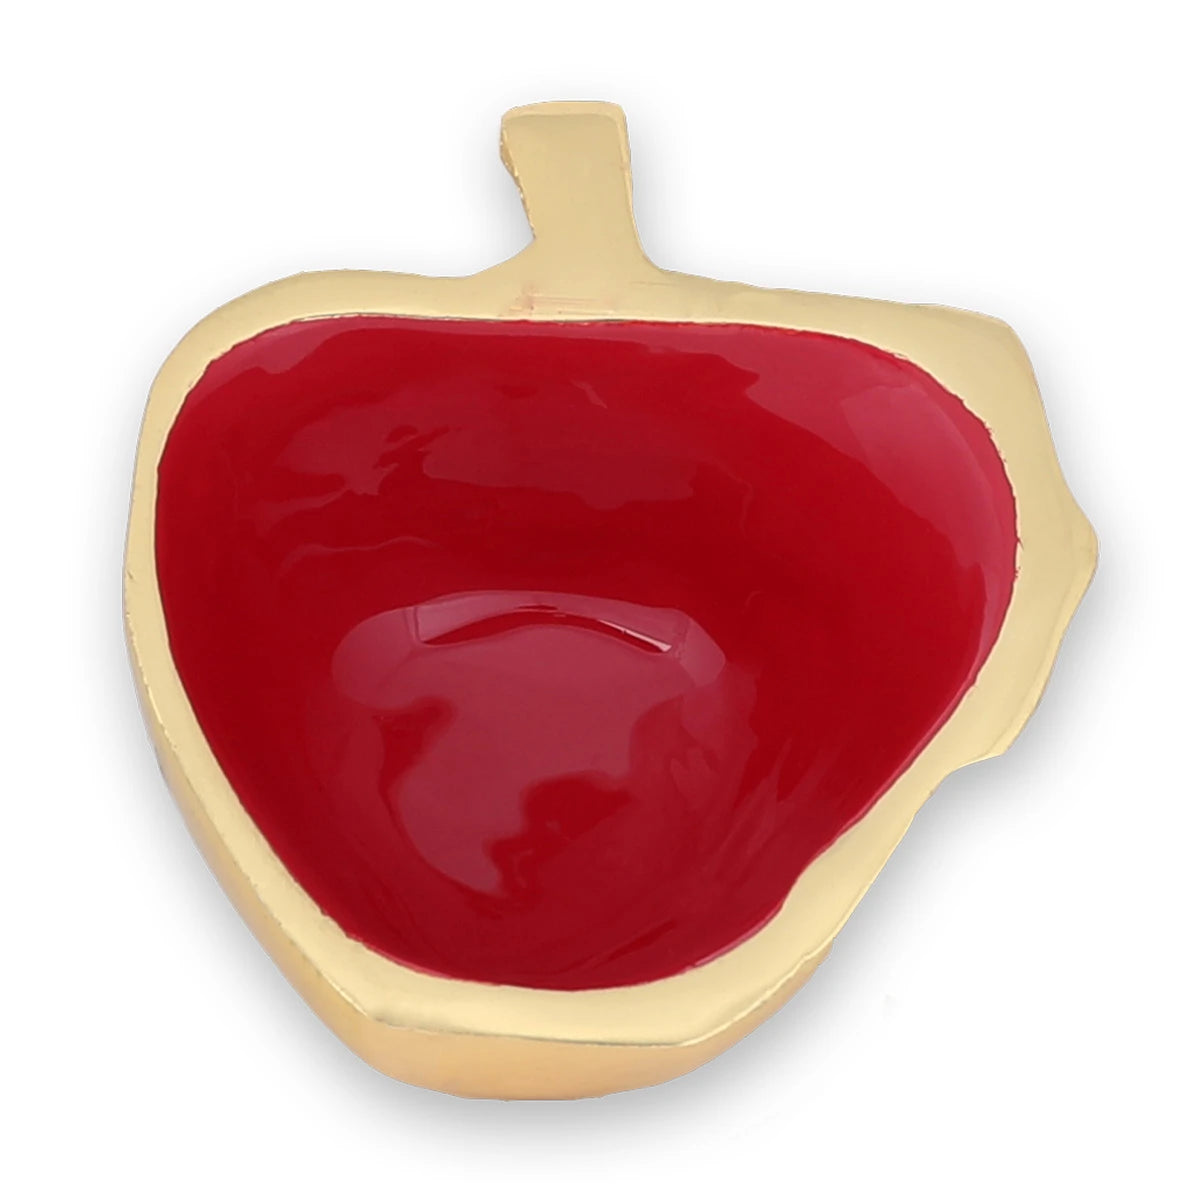 Top Angle View of Apple Shaped Aluminum Bowls Red